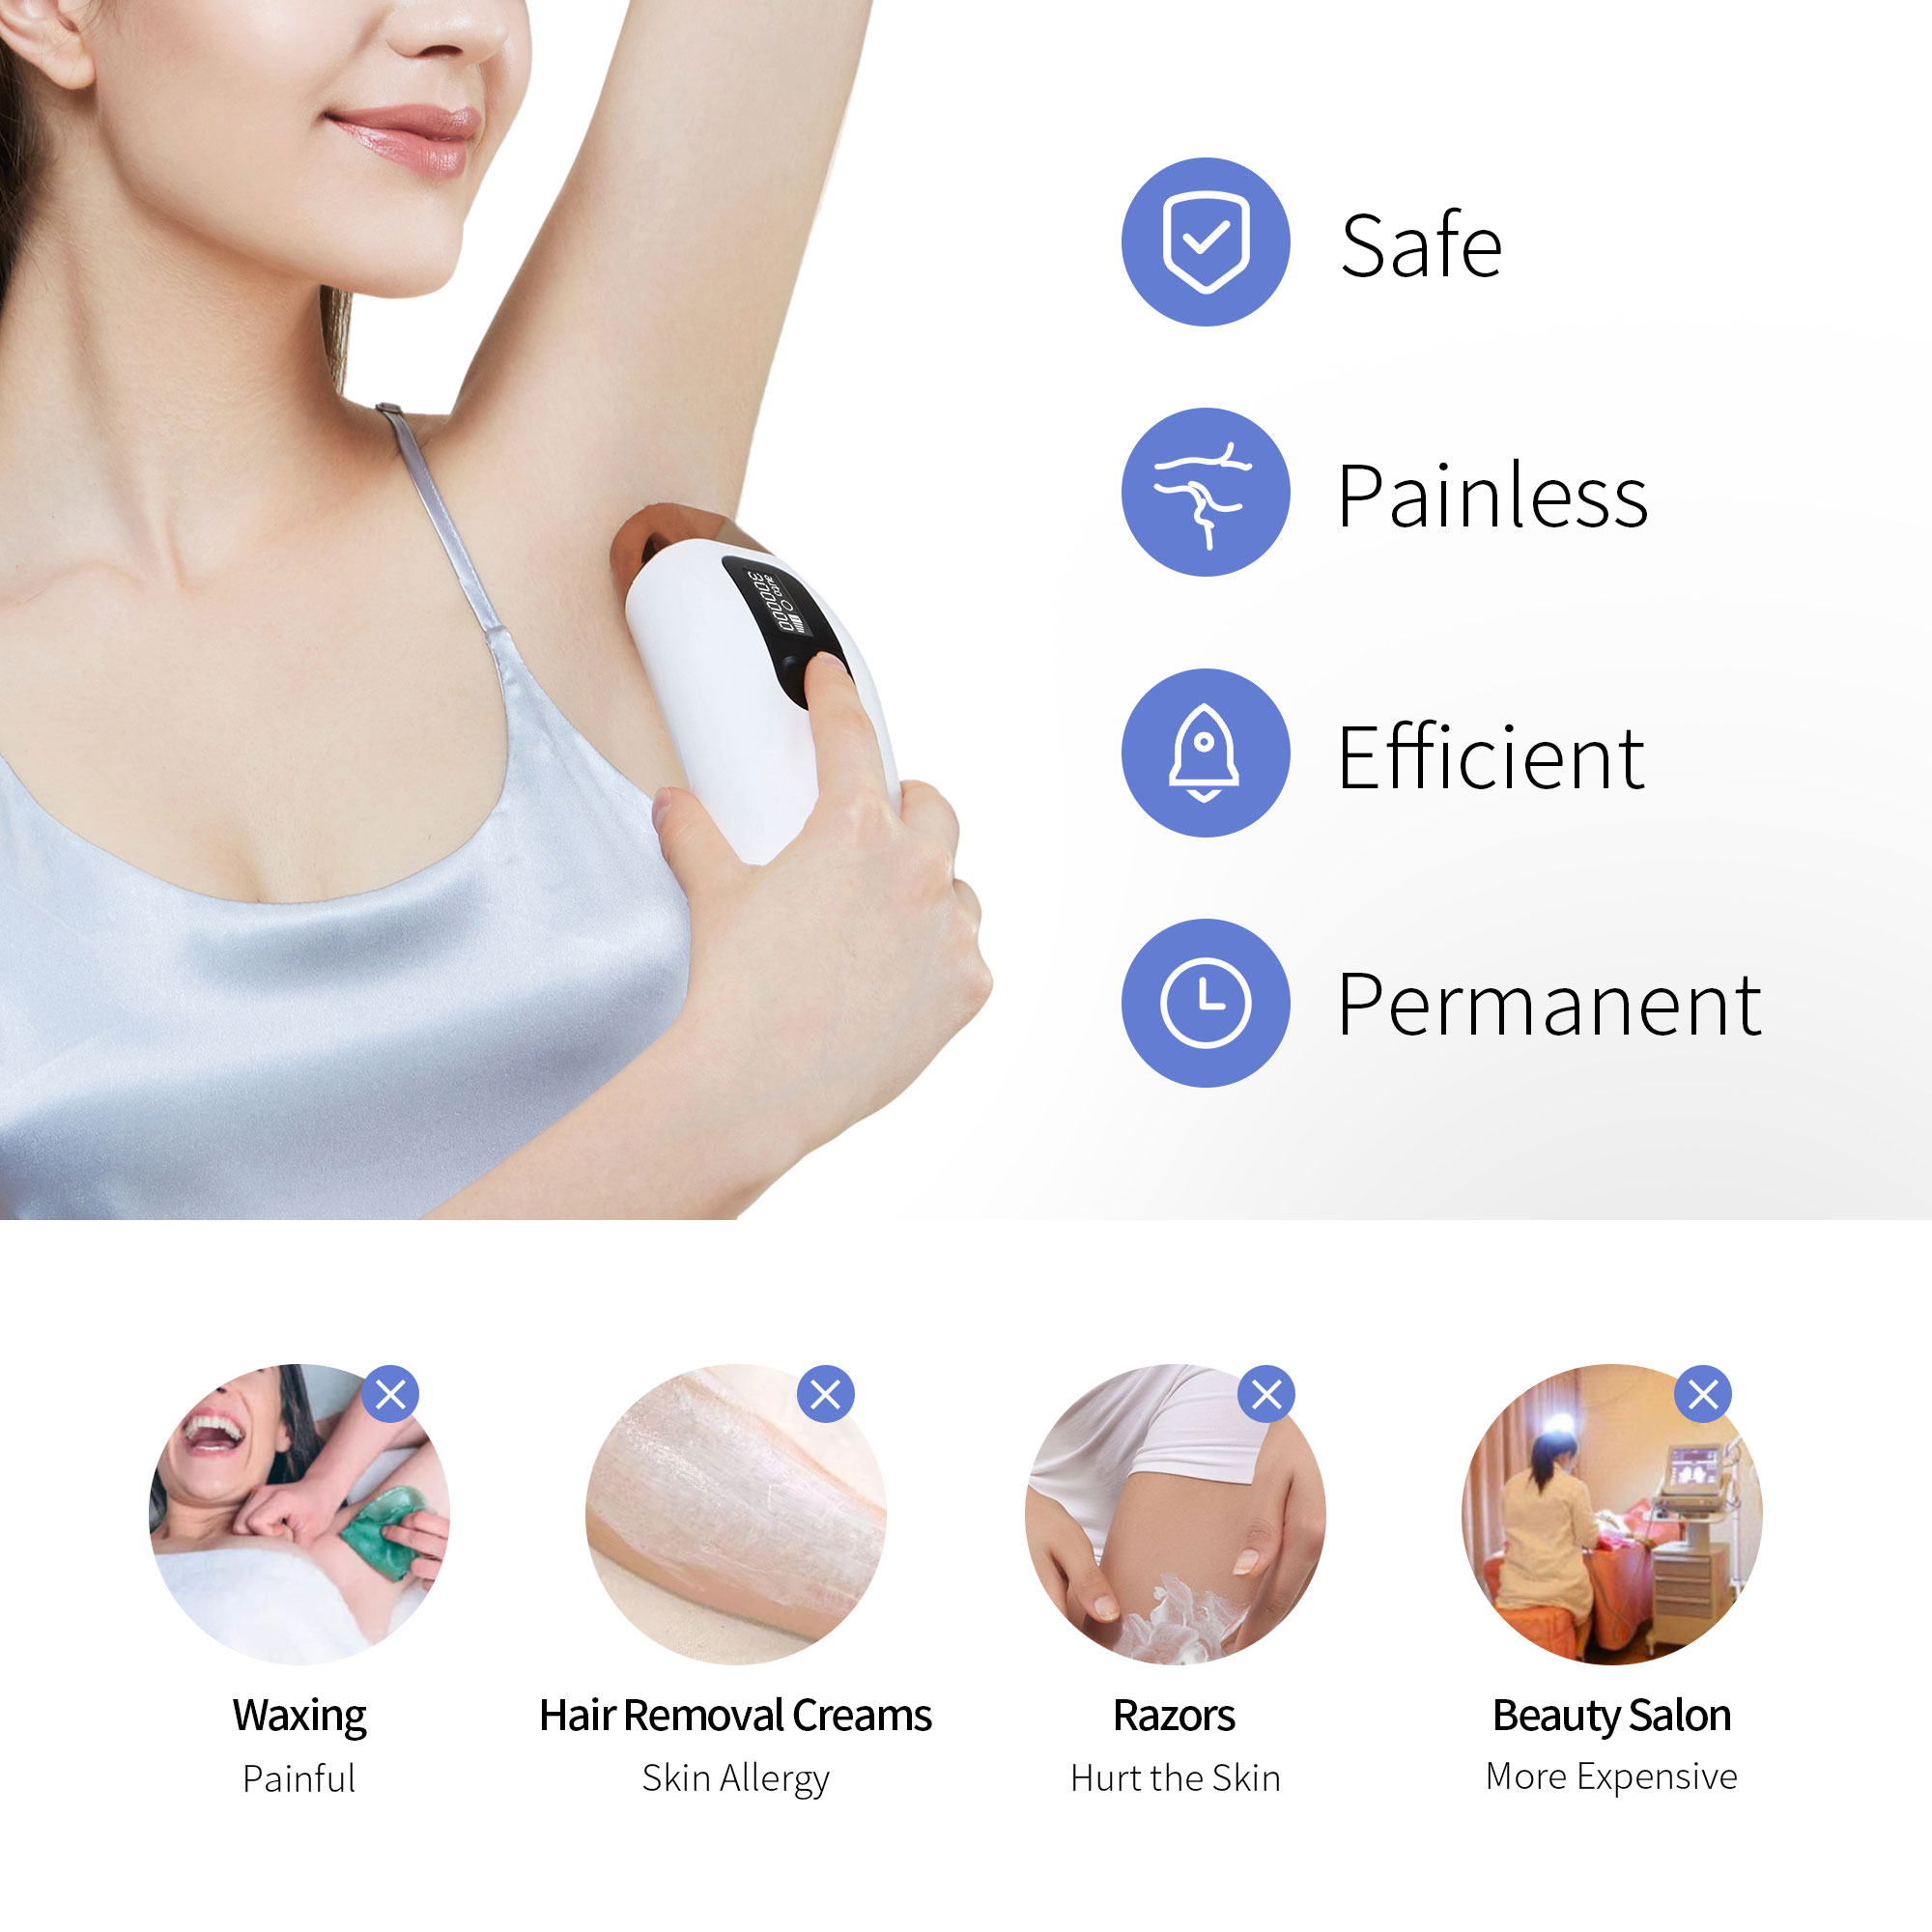 CosBeauty CB306 300000 Flashes Pulse Laser Epilator Household Permanent Hair Removal Machine Body Painless Electric Depilador